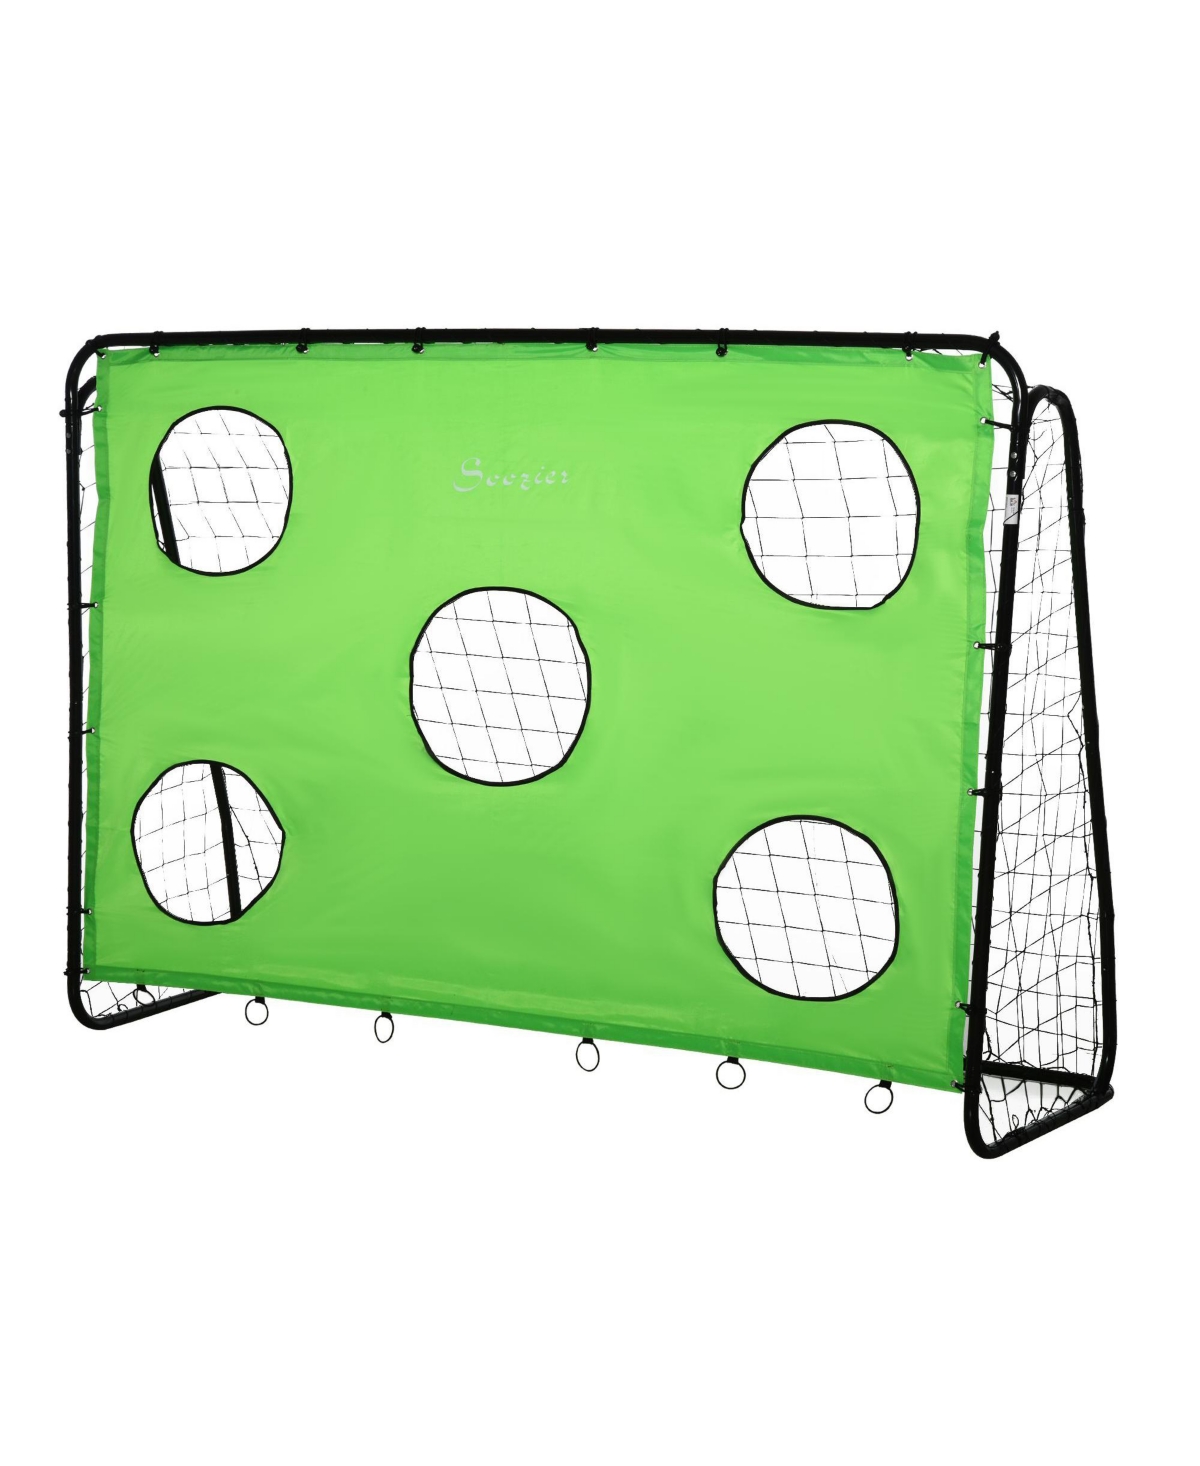 SoCcer Goal Target Goal Indoor Backyard with All Weather Polyester Net - Black